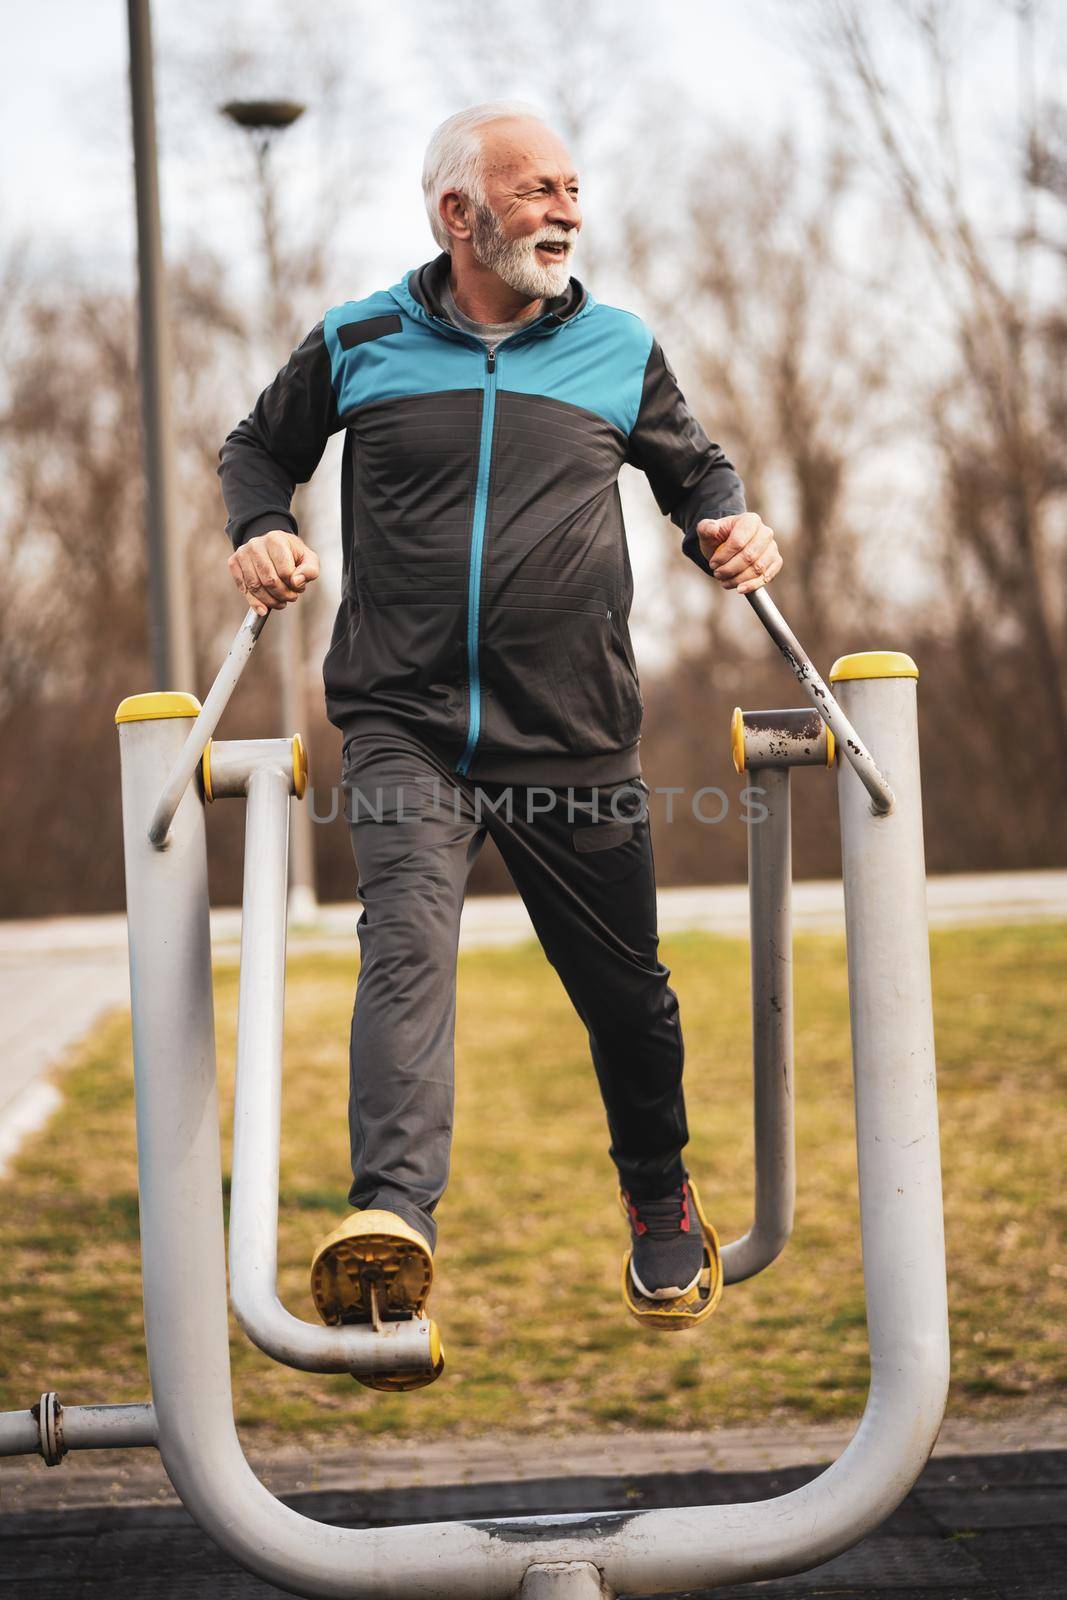 Active senior man is exercising on outdoor gym. Healthy retirement lifestyle.